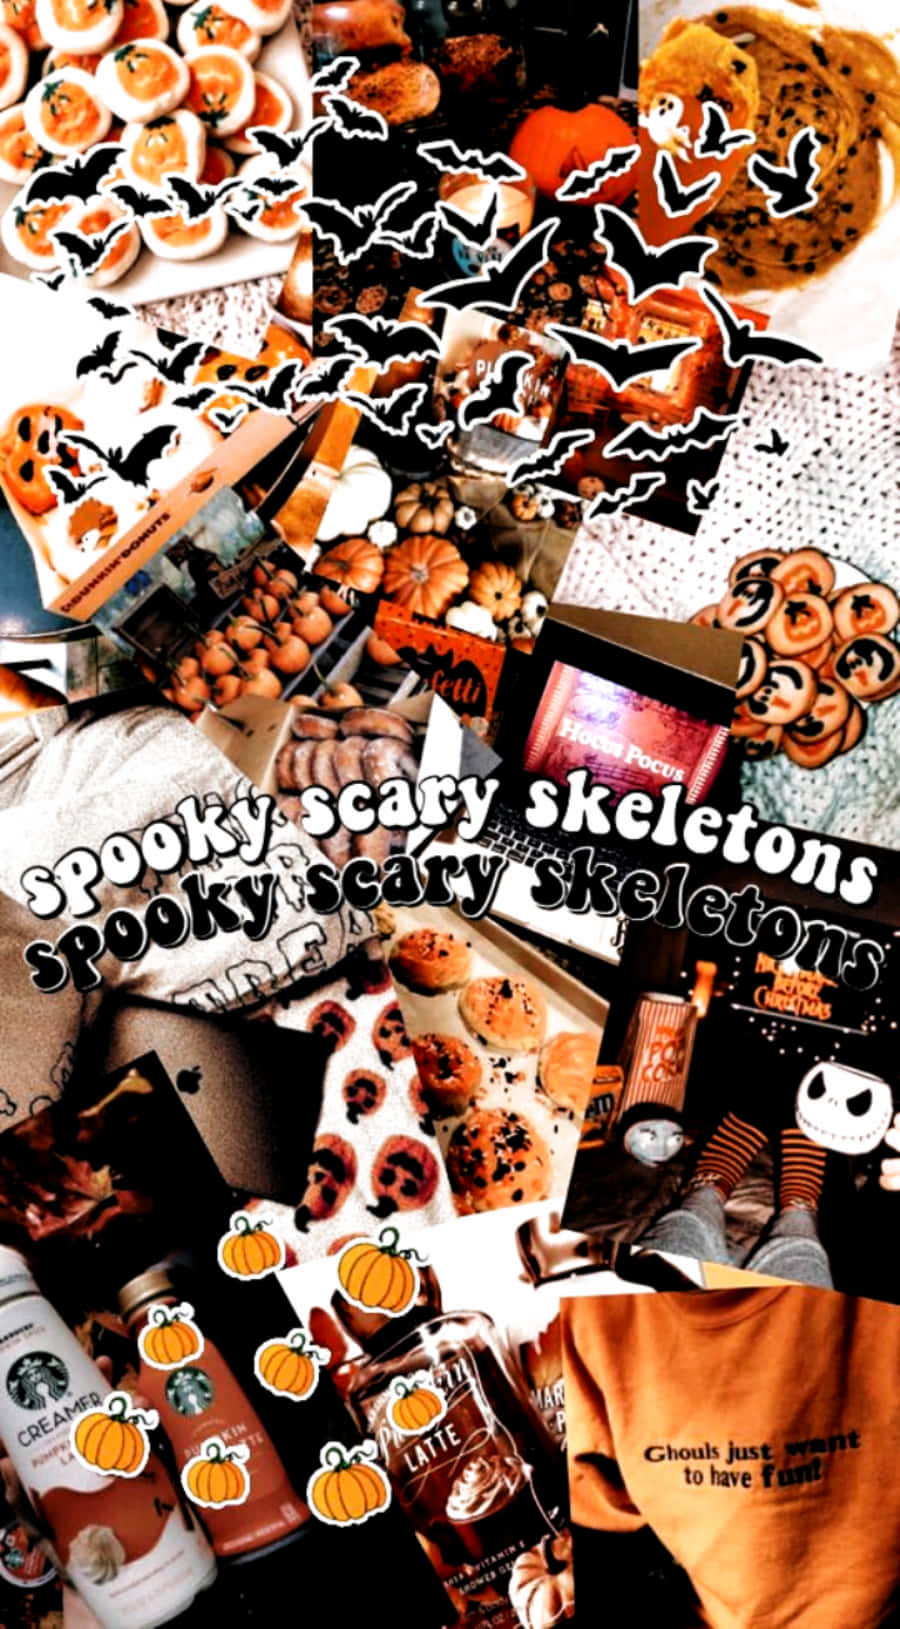 Enjoy The Spooky Season With This Halloween Aesthetic! Wallpaper